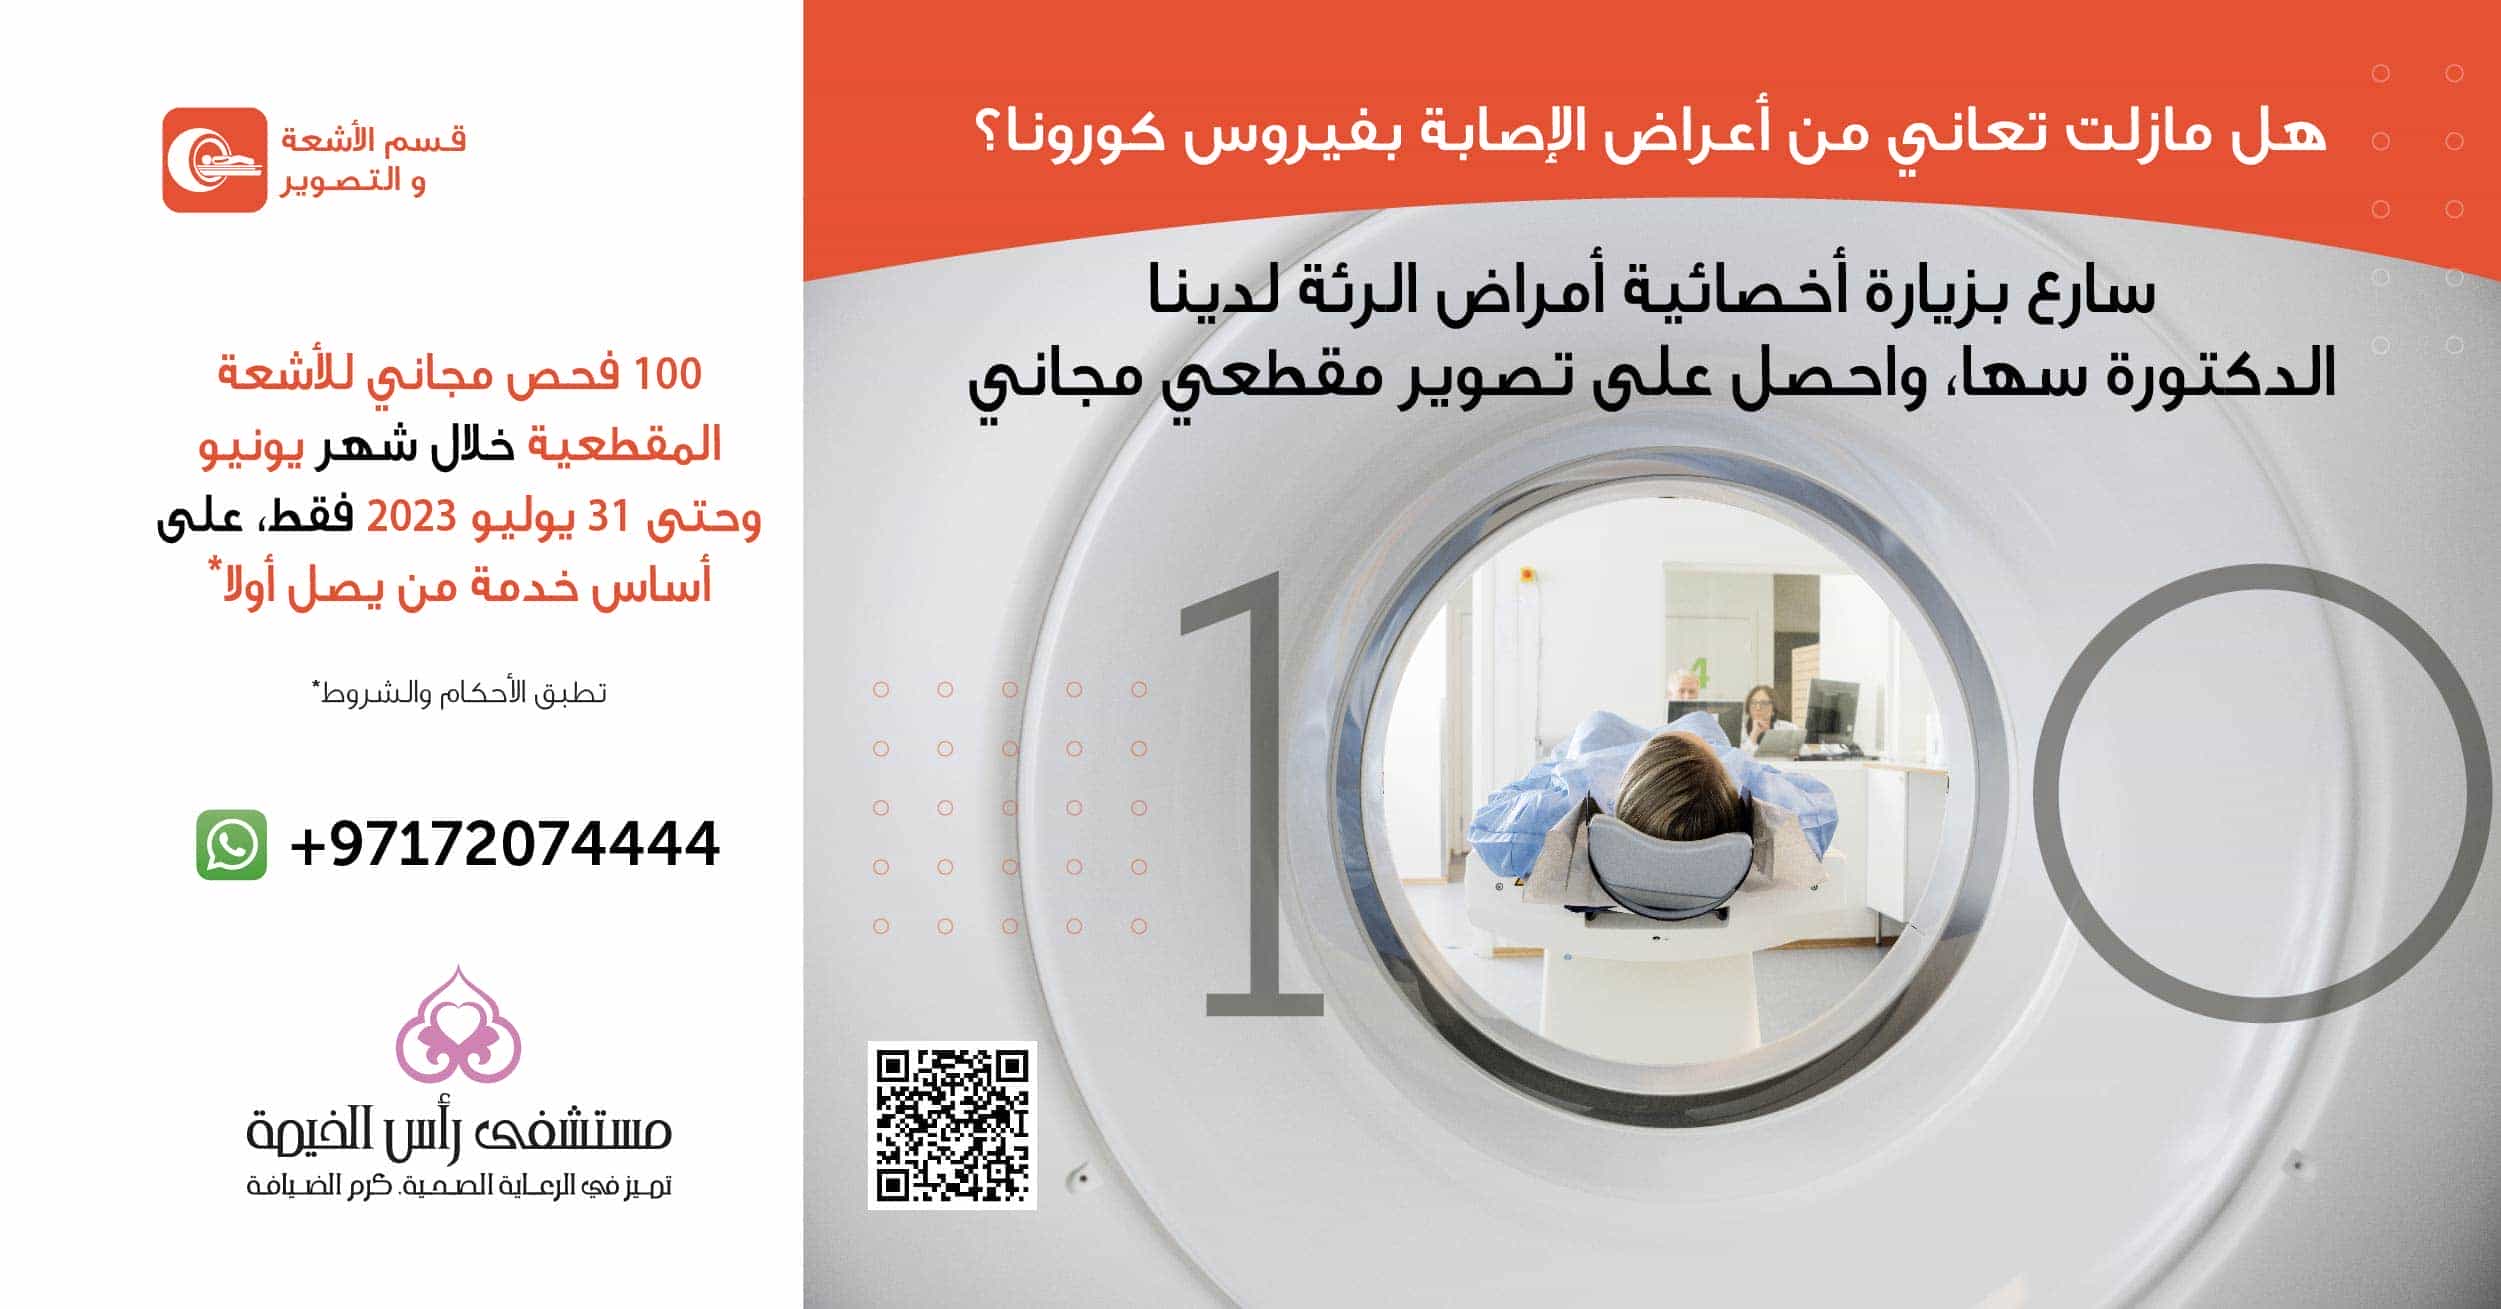 Free 100 CT Scans